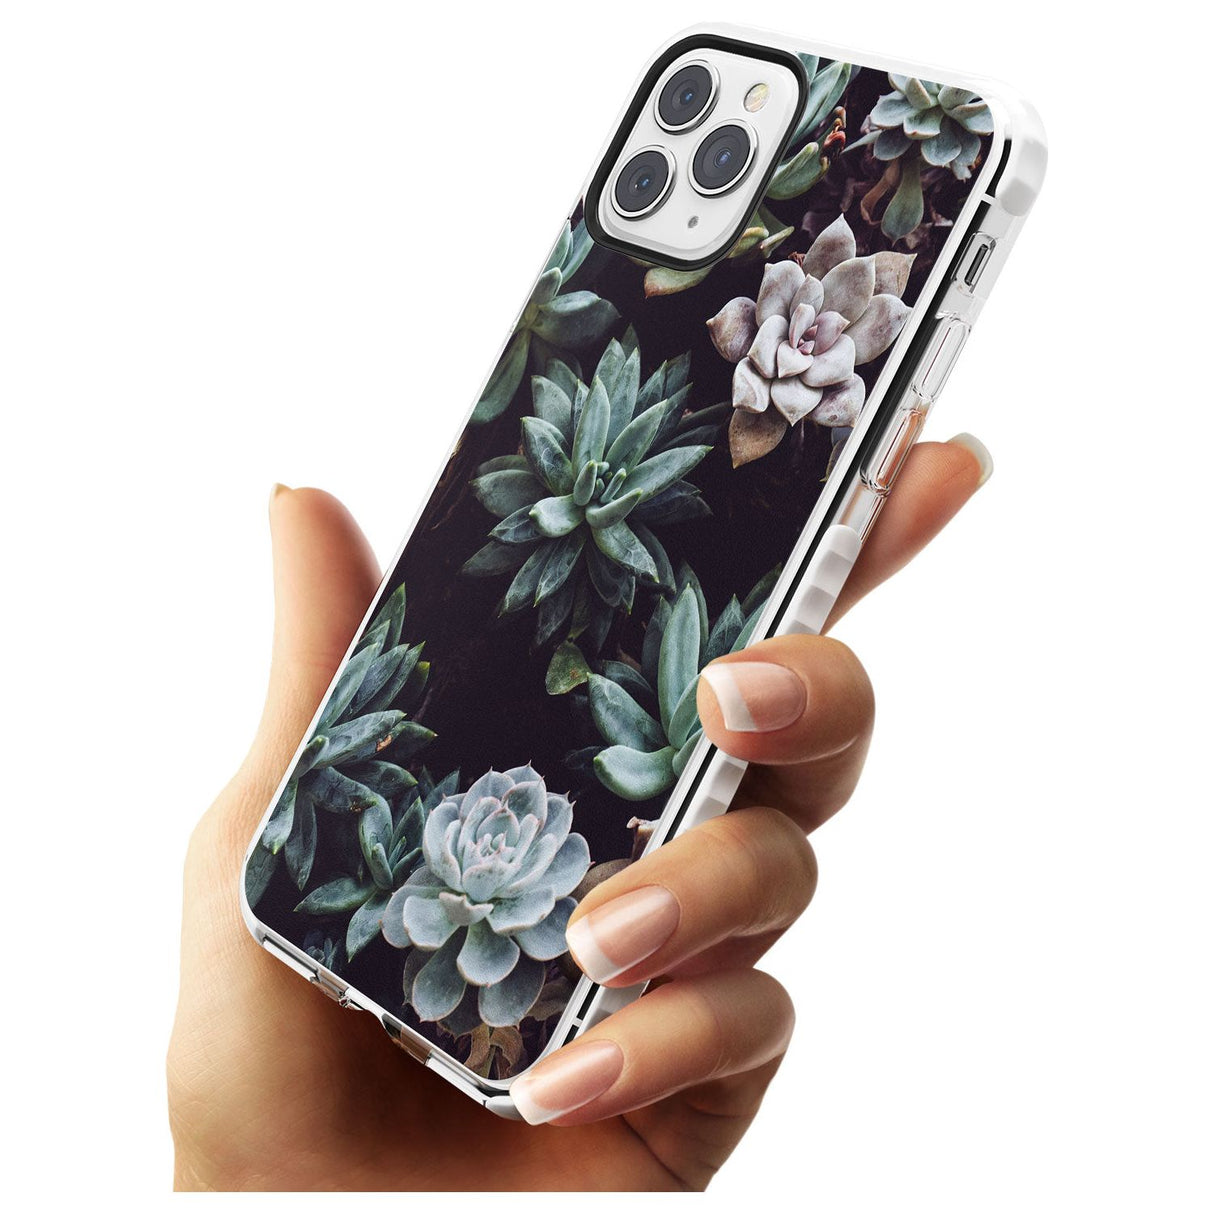 Mixed Succulents - Real Botanical Photographs Impact Phone Case for iPhone 11 Pro Max